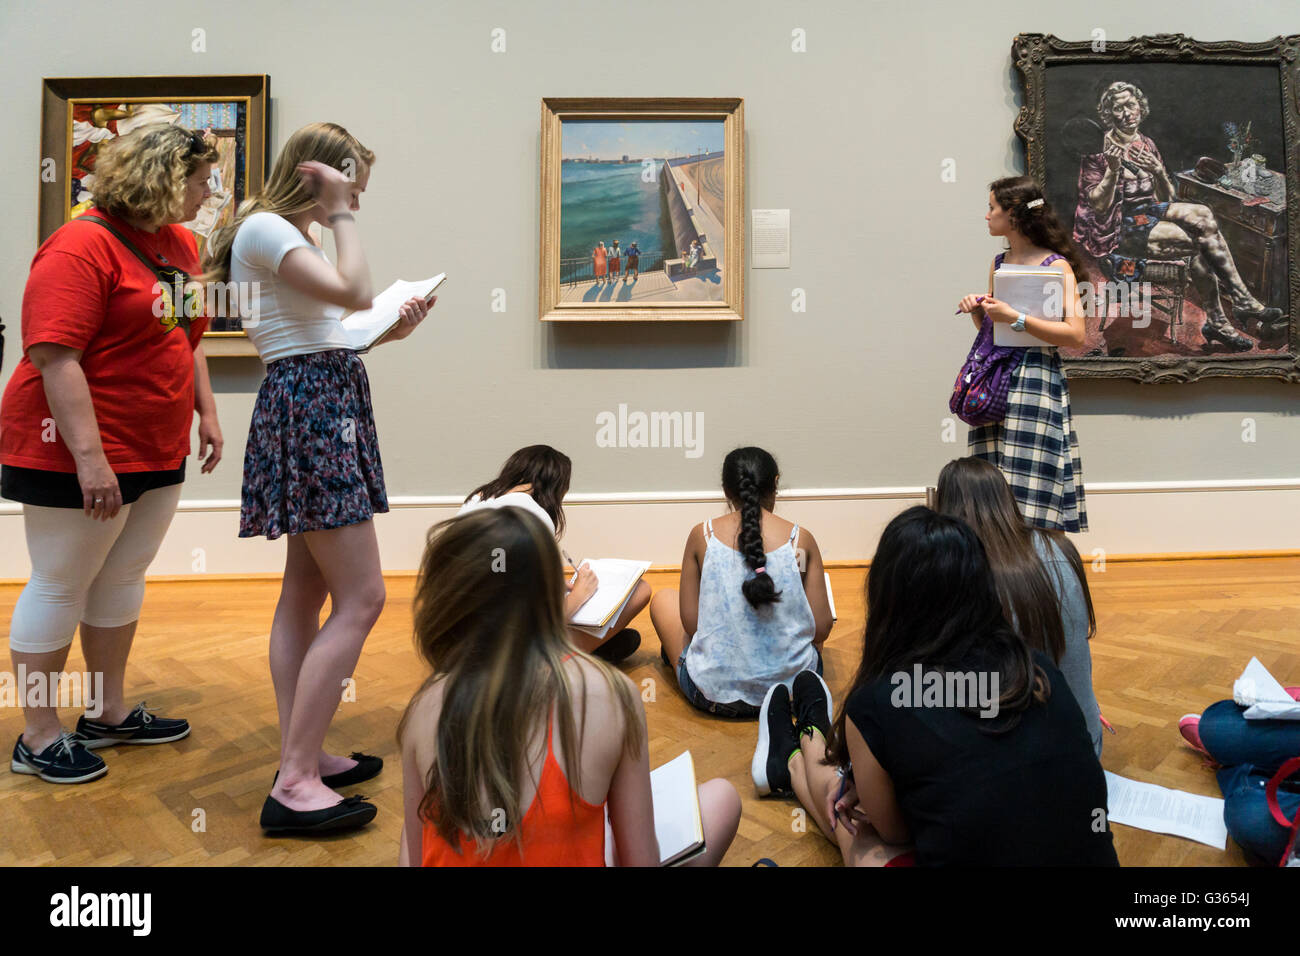 Visitors in a gallery of the Art Institute of Chicago. Stock Photo